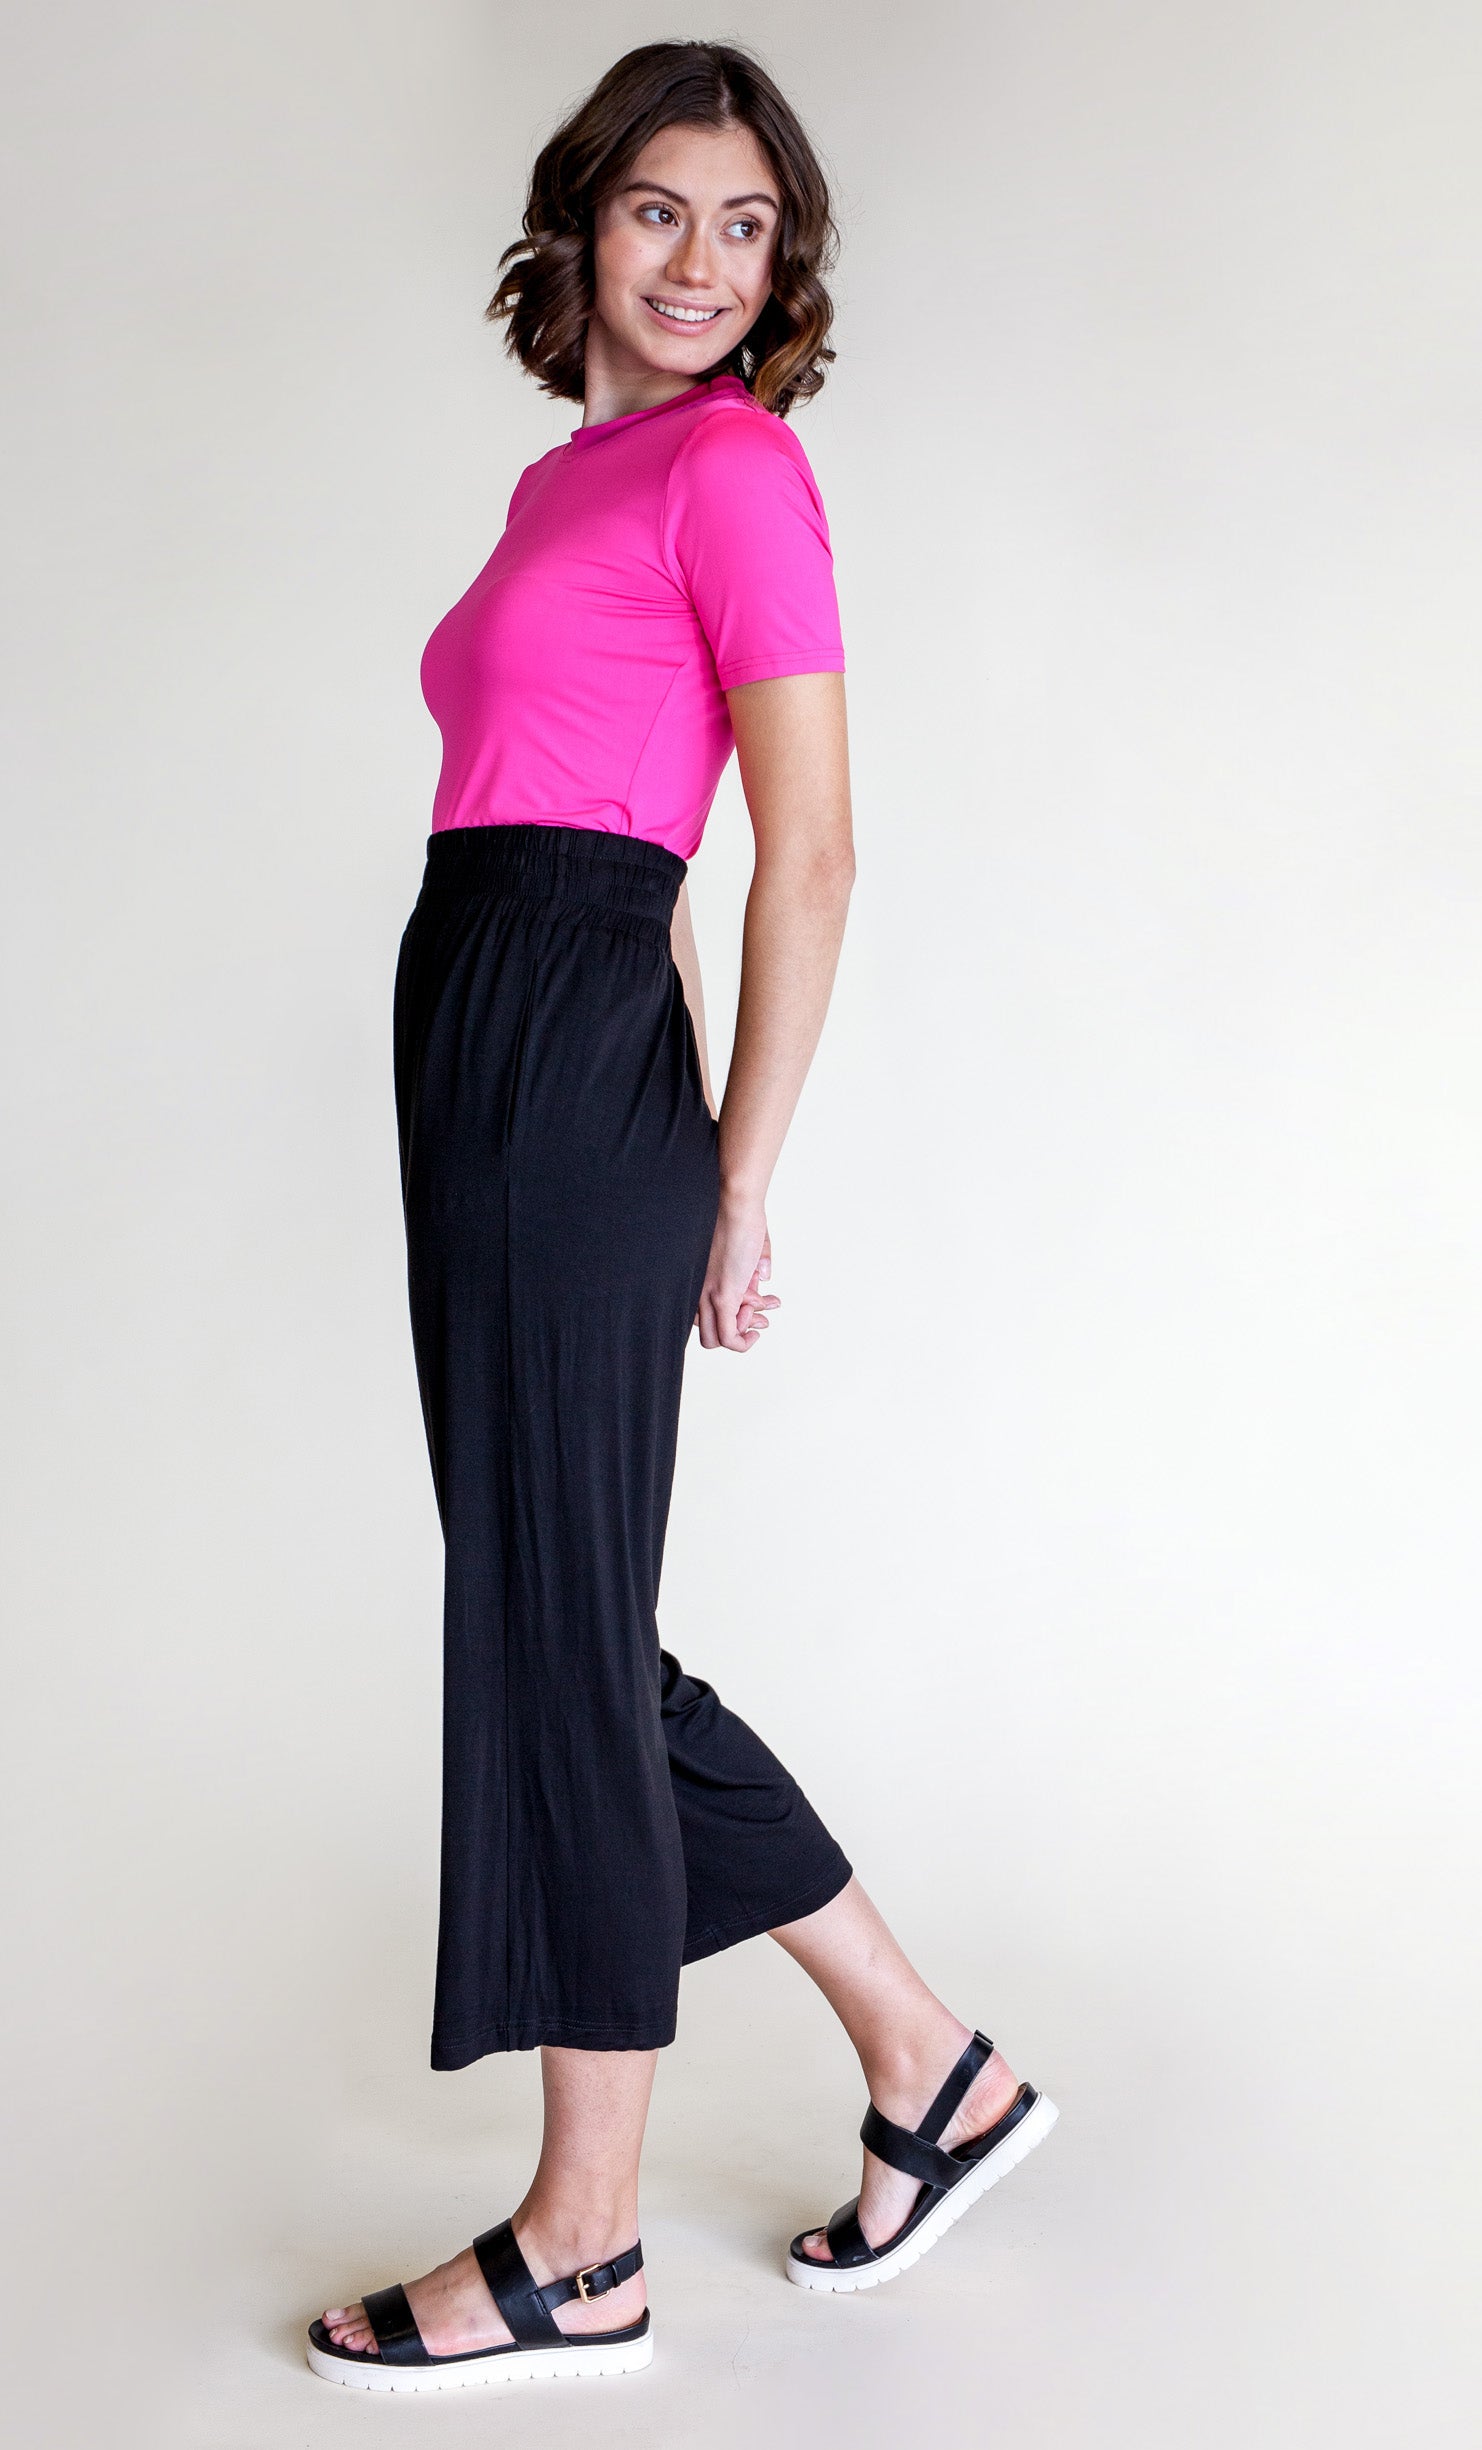 Relax Max Pants Black - Pink Martini Collection